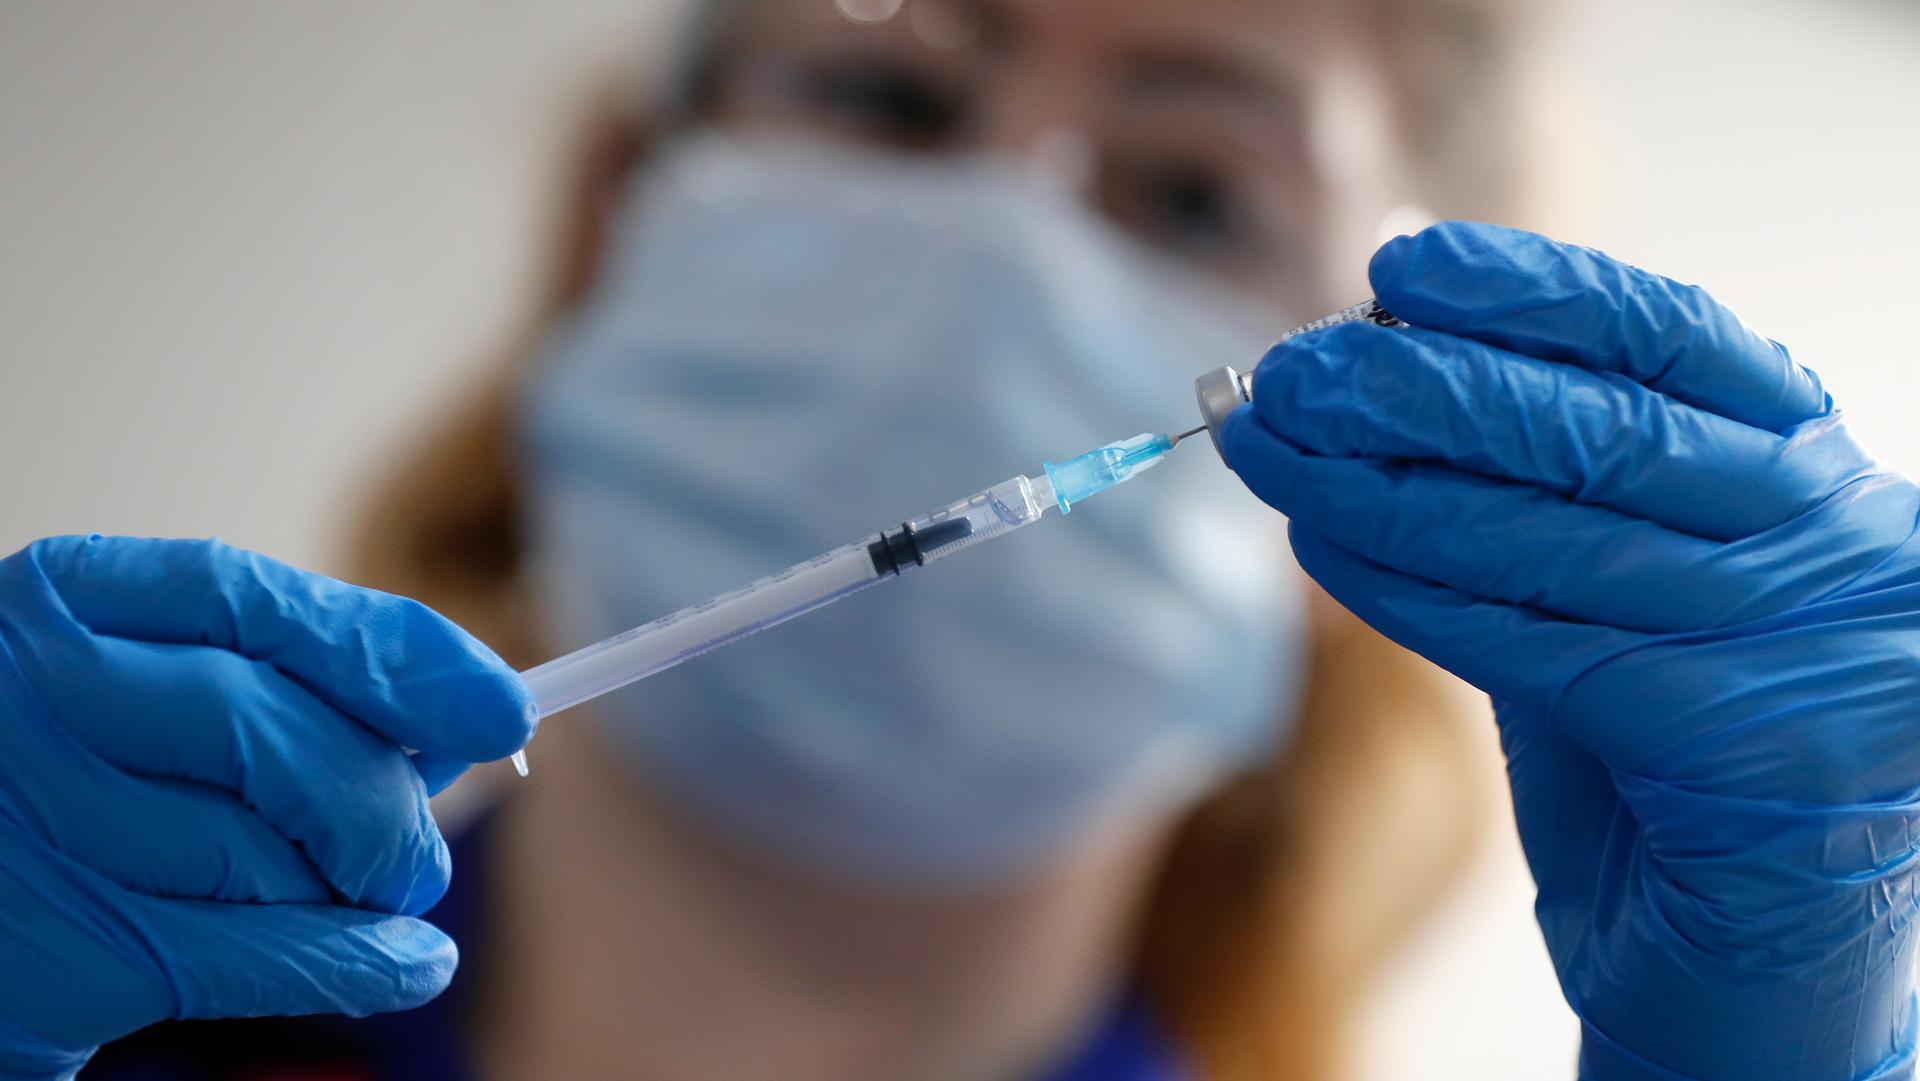 A close-up photograph show a syringe being held by two hands wearing blue medical gloves and the face of a nurse in soft focus in the background.